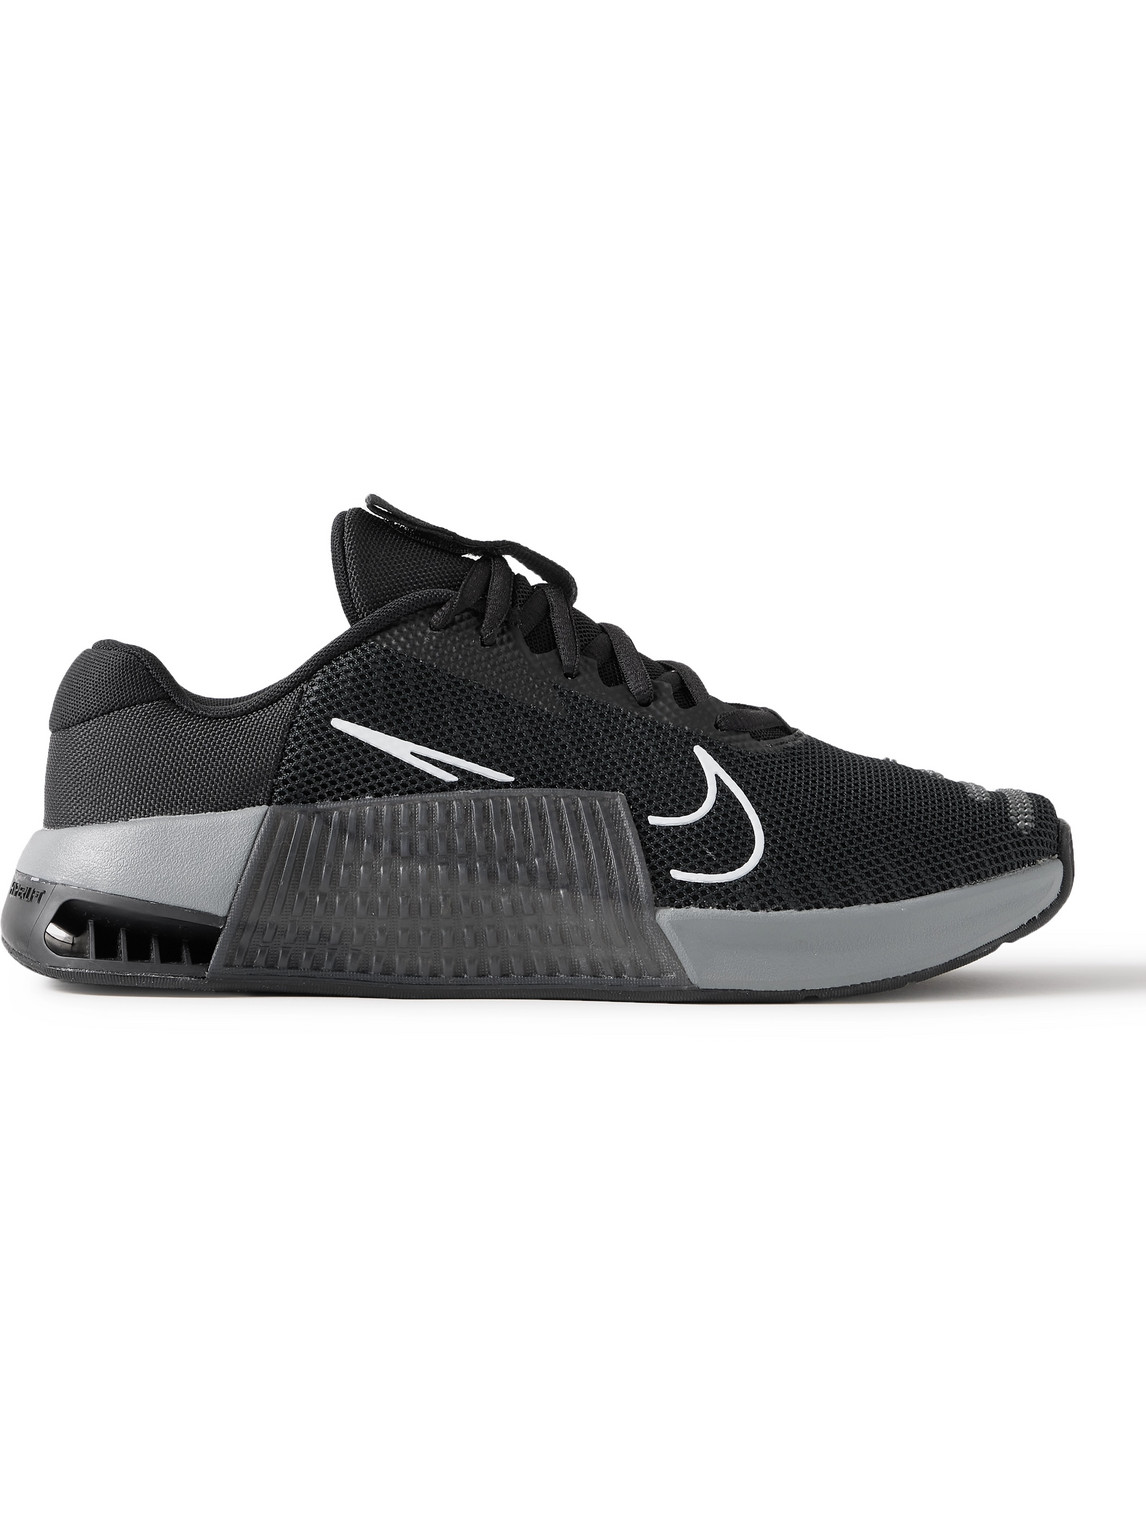 Metcon 9 Rubber-Trimmed Mesh Sneakers